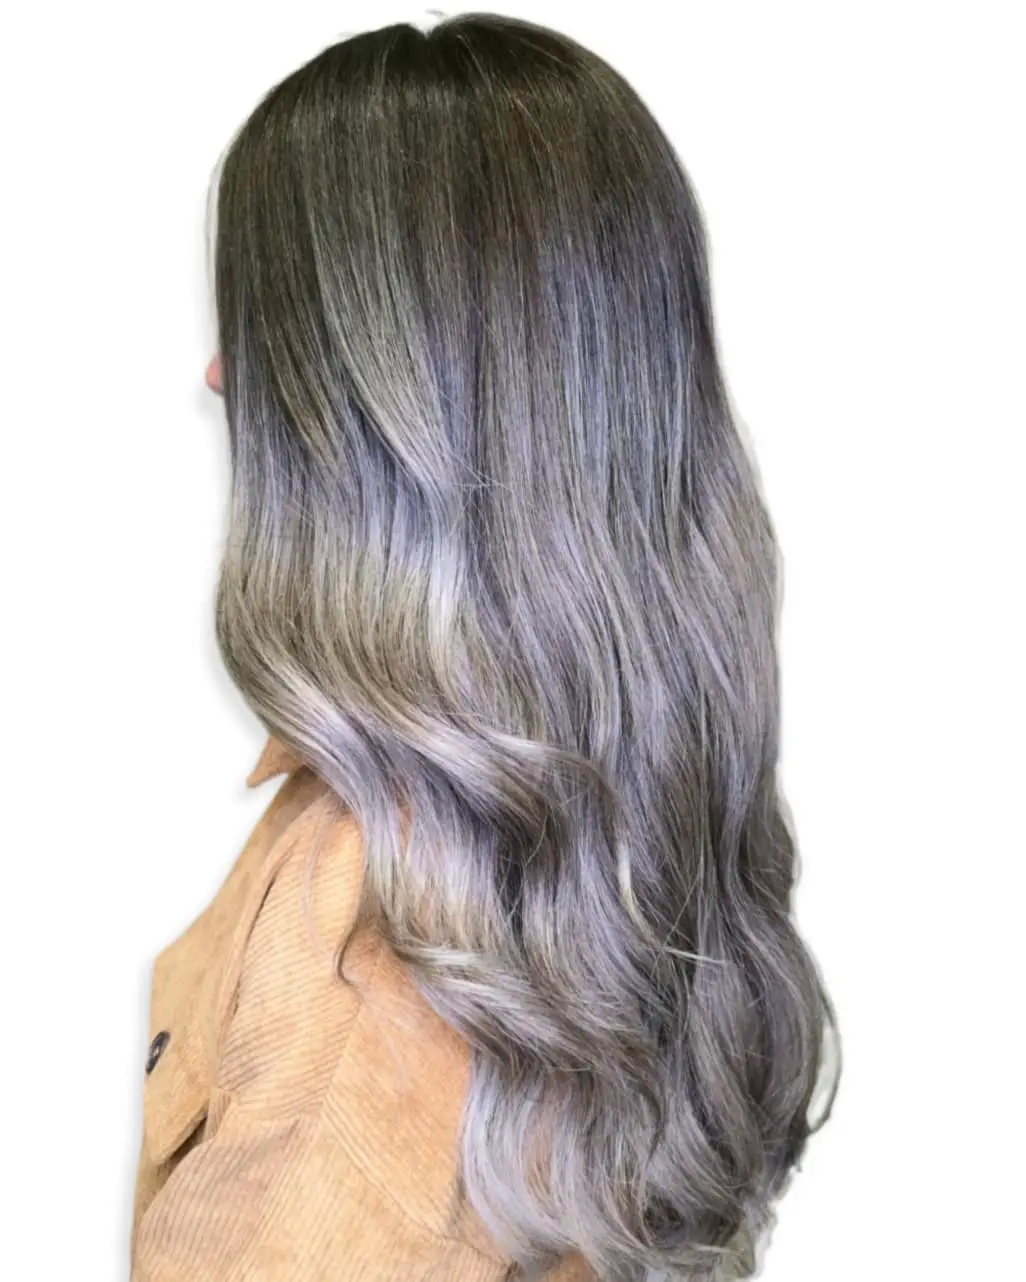 30-gray-and-038-silver-highlights-on-brown-hair-trending-light-and-038-dark-ideas Icy Balayage for Brunettes